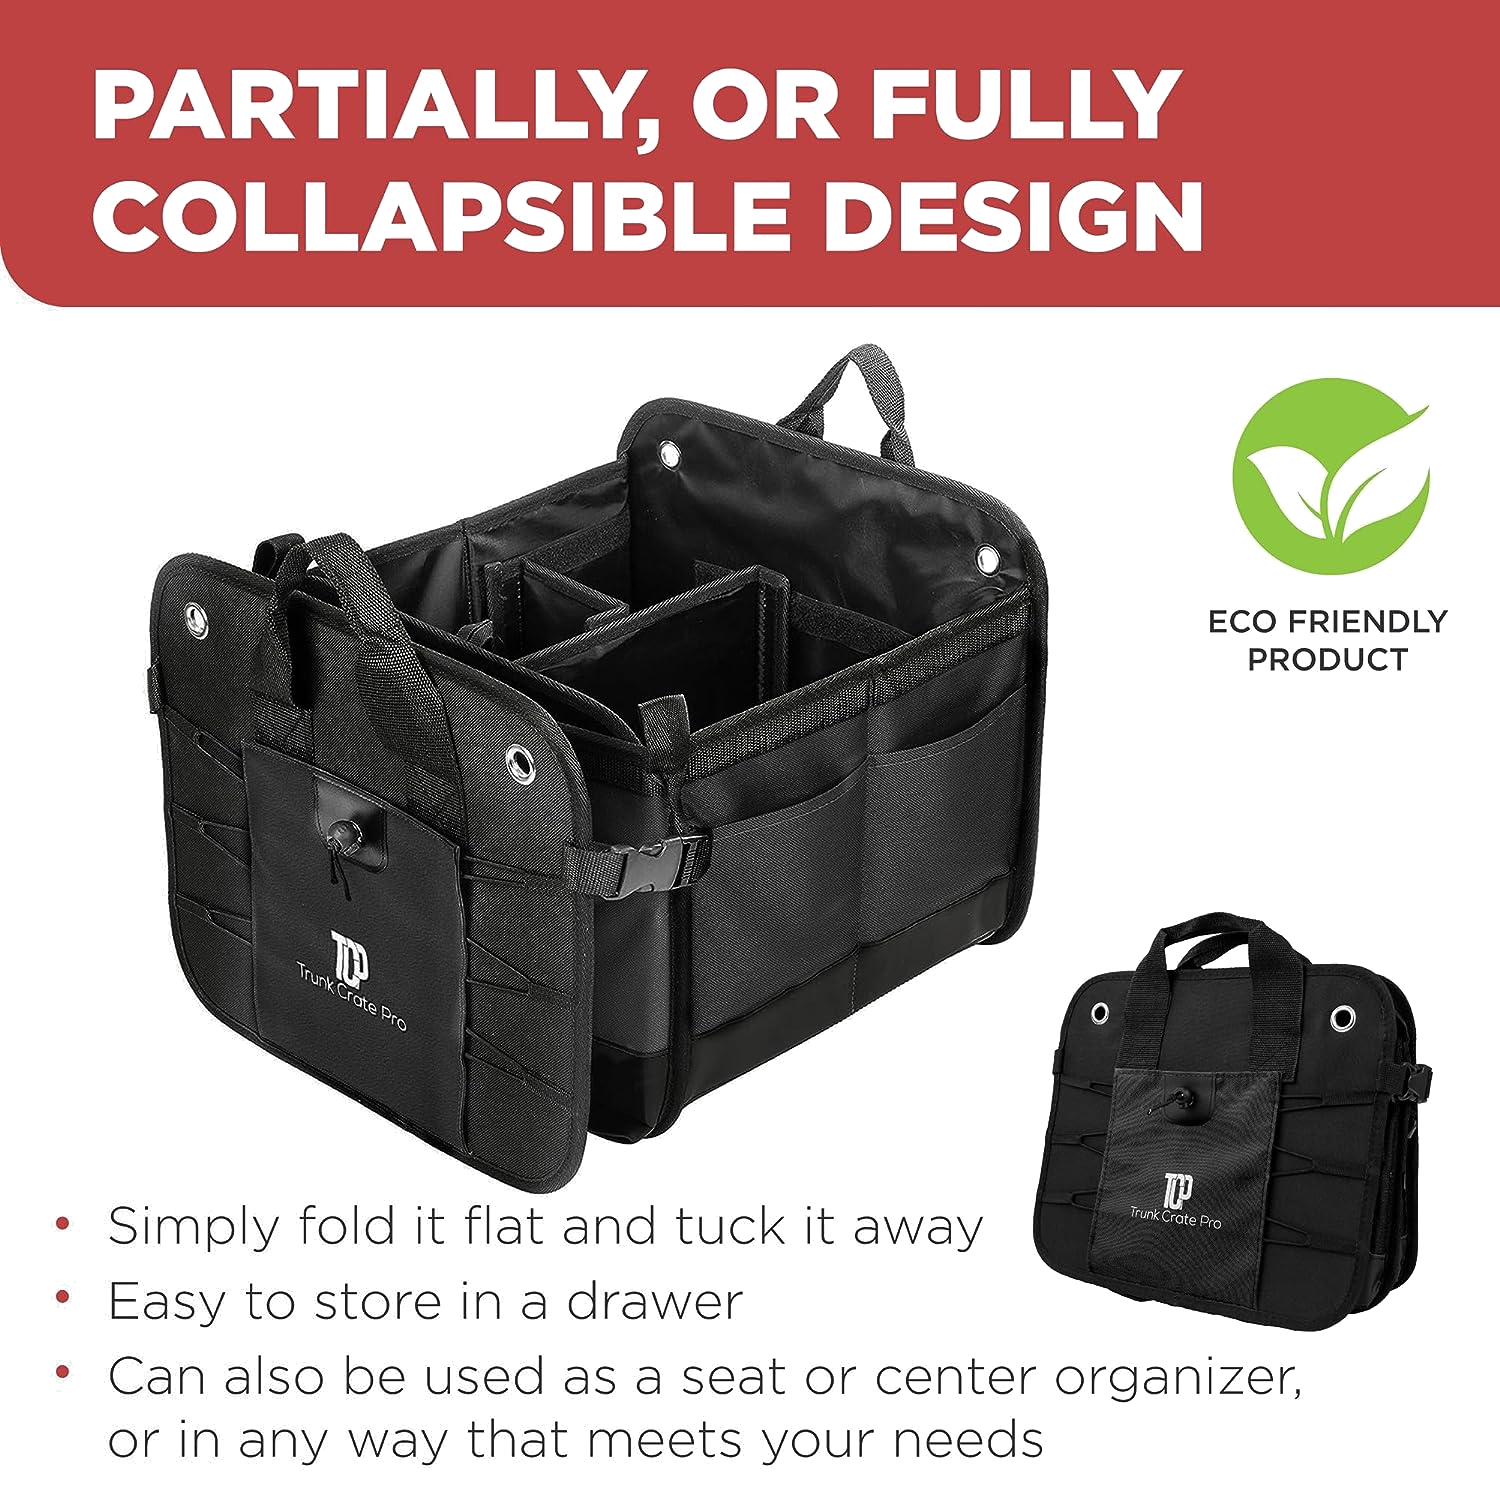 "Premium Car Trunk Organizer - Stylish and Resilient Construction, Customizable Compartments, Ideal Present for Auto Enthusiasts, Portable and Collapsible, Optimal for SUVs and Cars (Large, Black)"